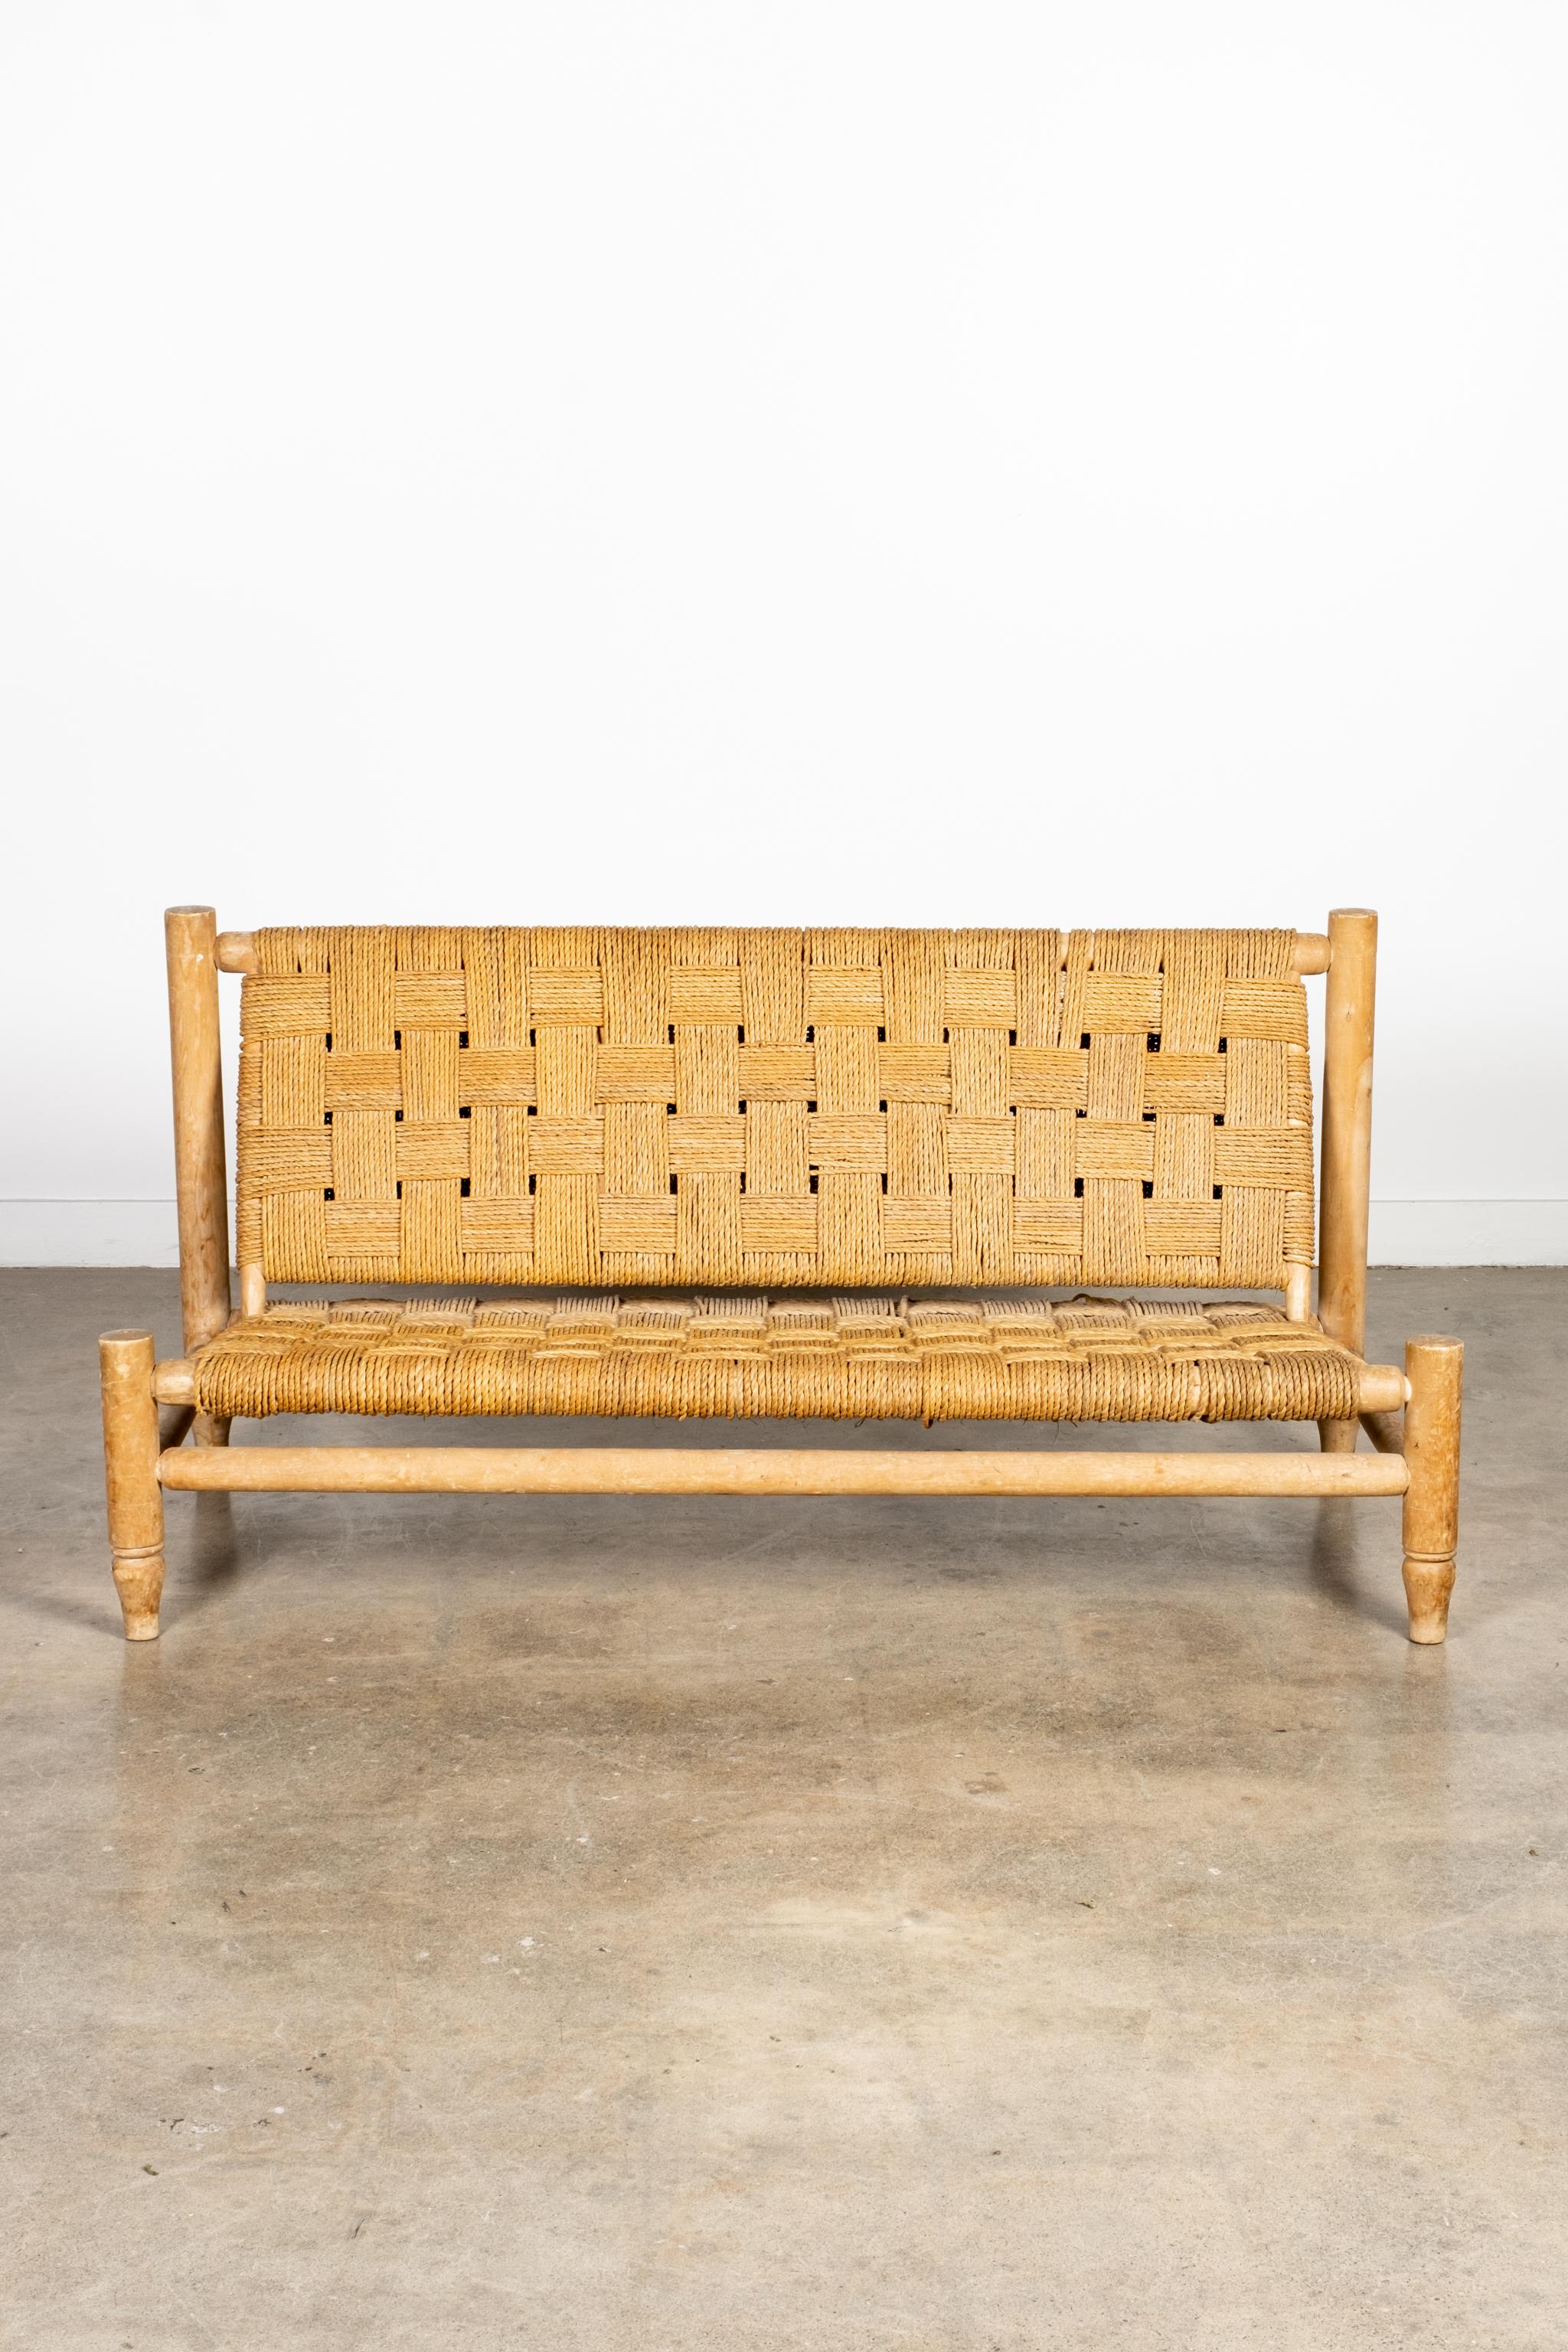 Mid-Century Modern Rare 1950s Wood and Woven Rope 2-Seater Loveseat by Adrien Audoux & Frida Minet